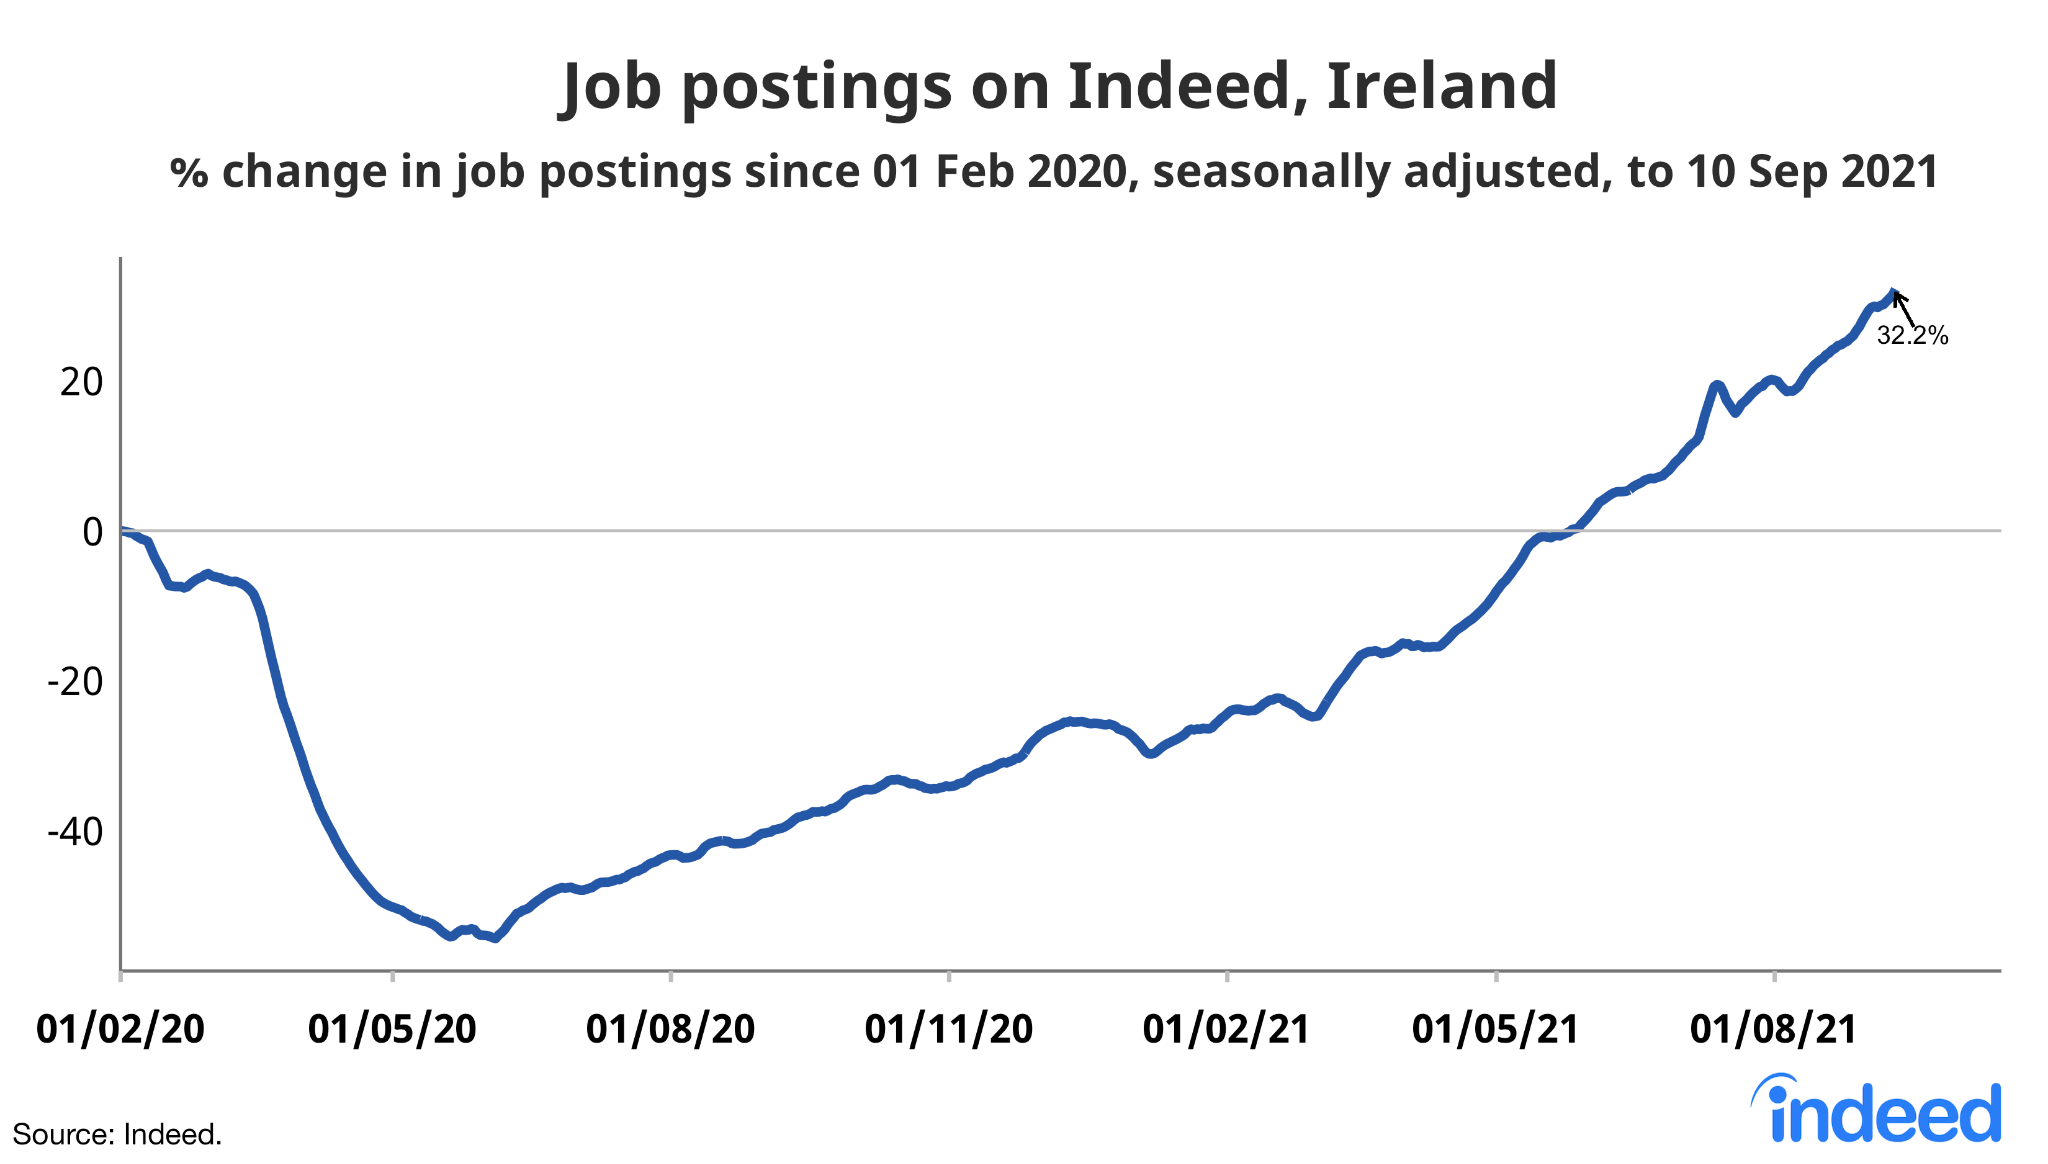 A line graph titled “Job postings on Indeed Ireland” 